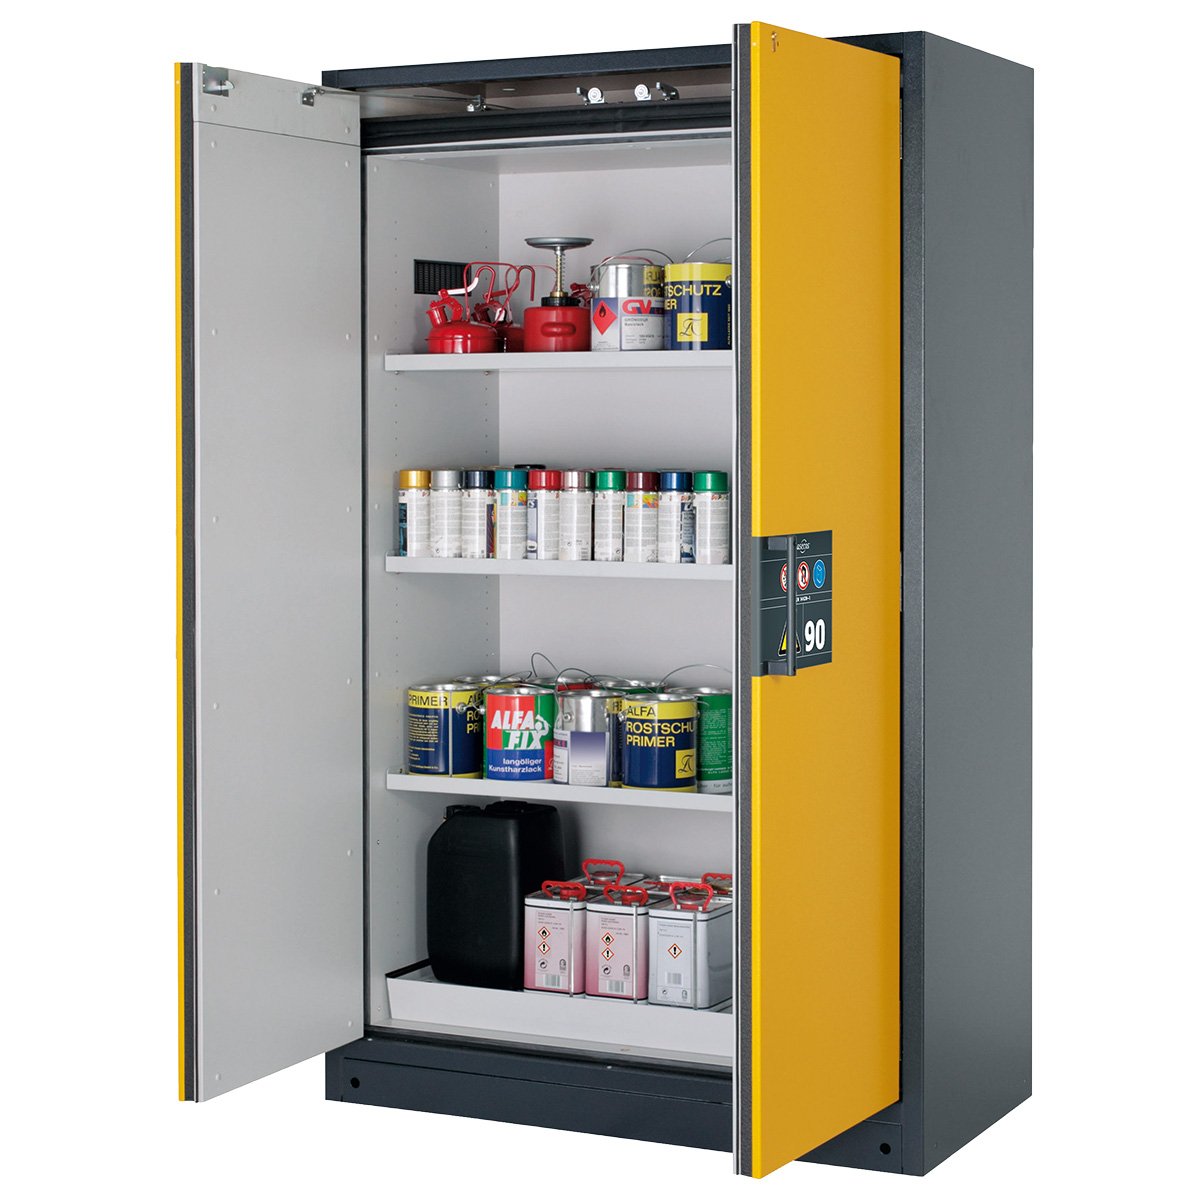 Safety storage cabinet, width 119,30 cm, 3 shelfs, perforated insert and bottom sump